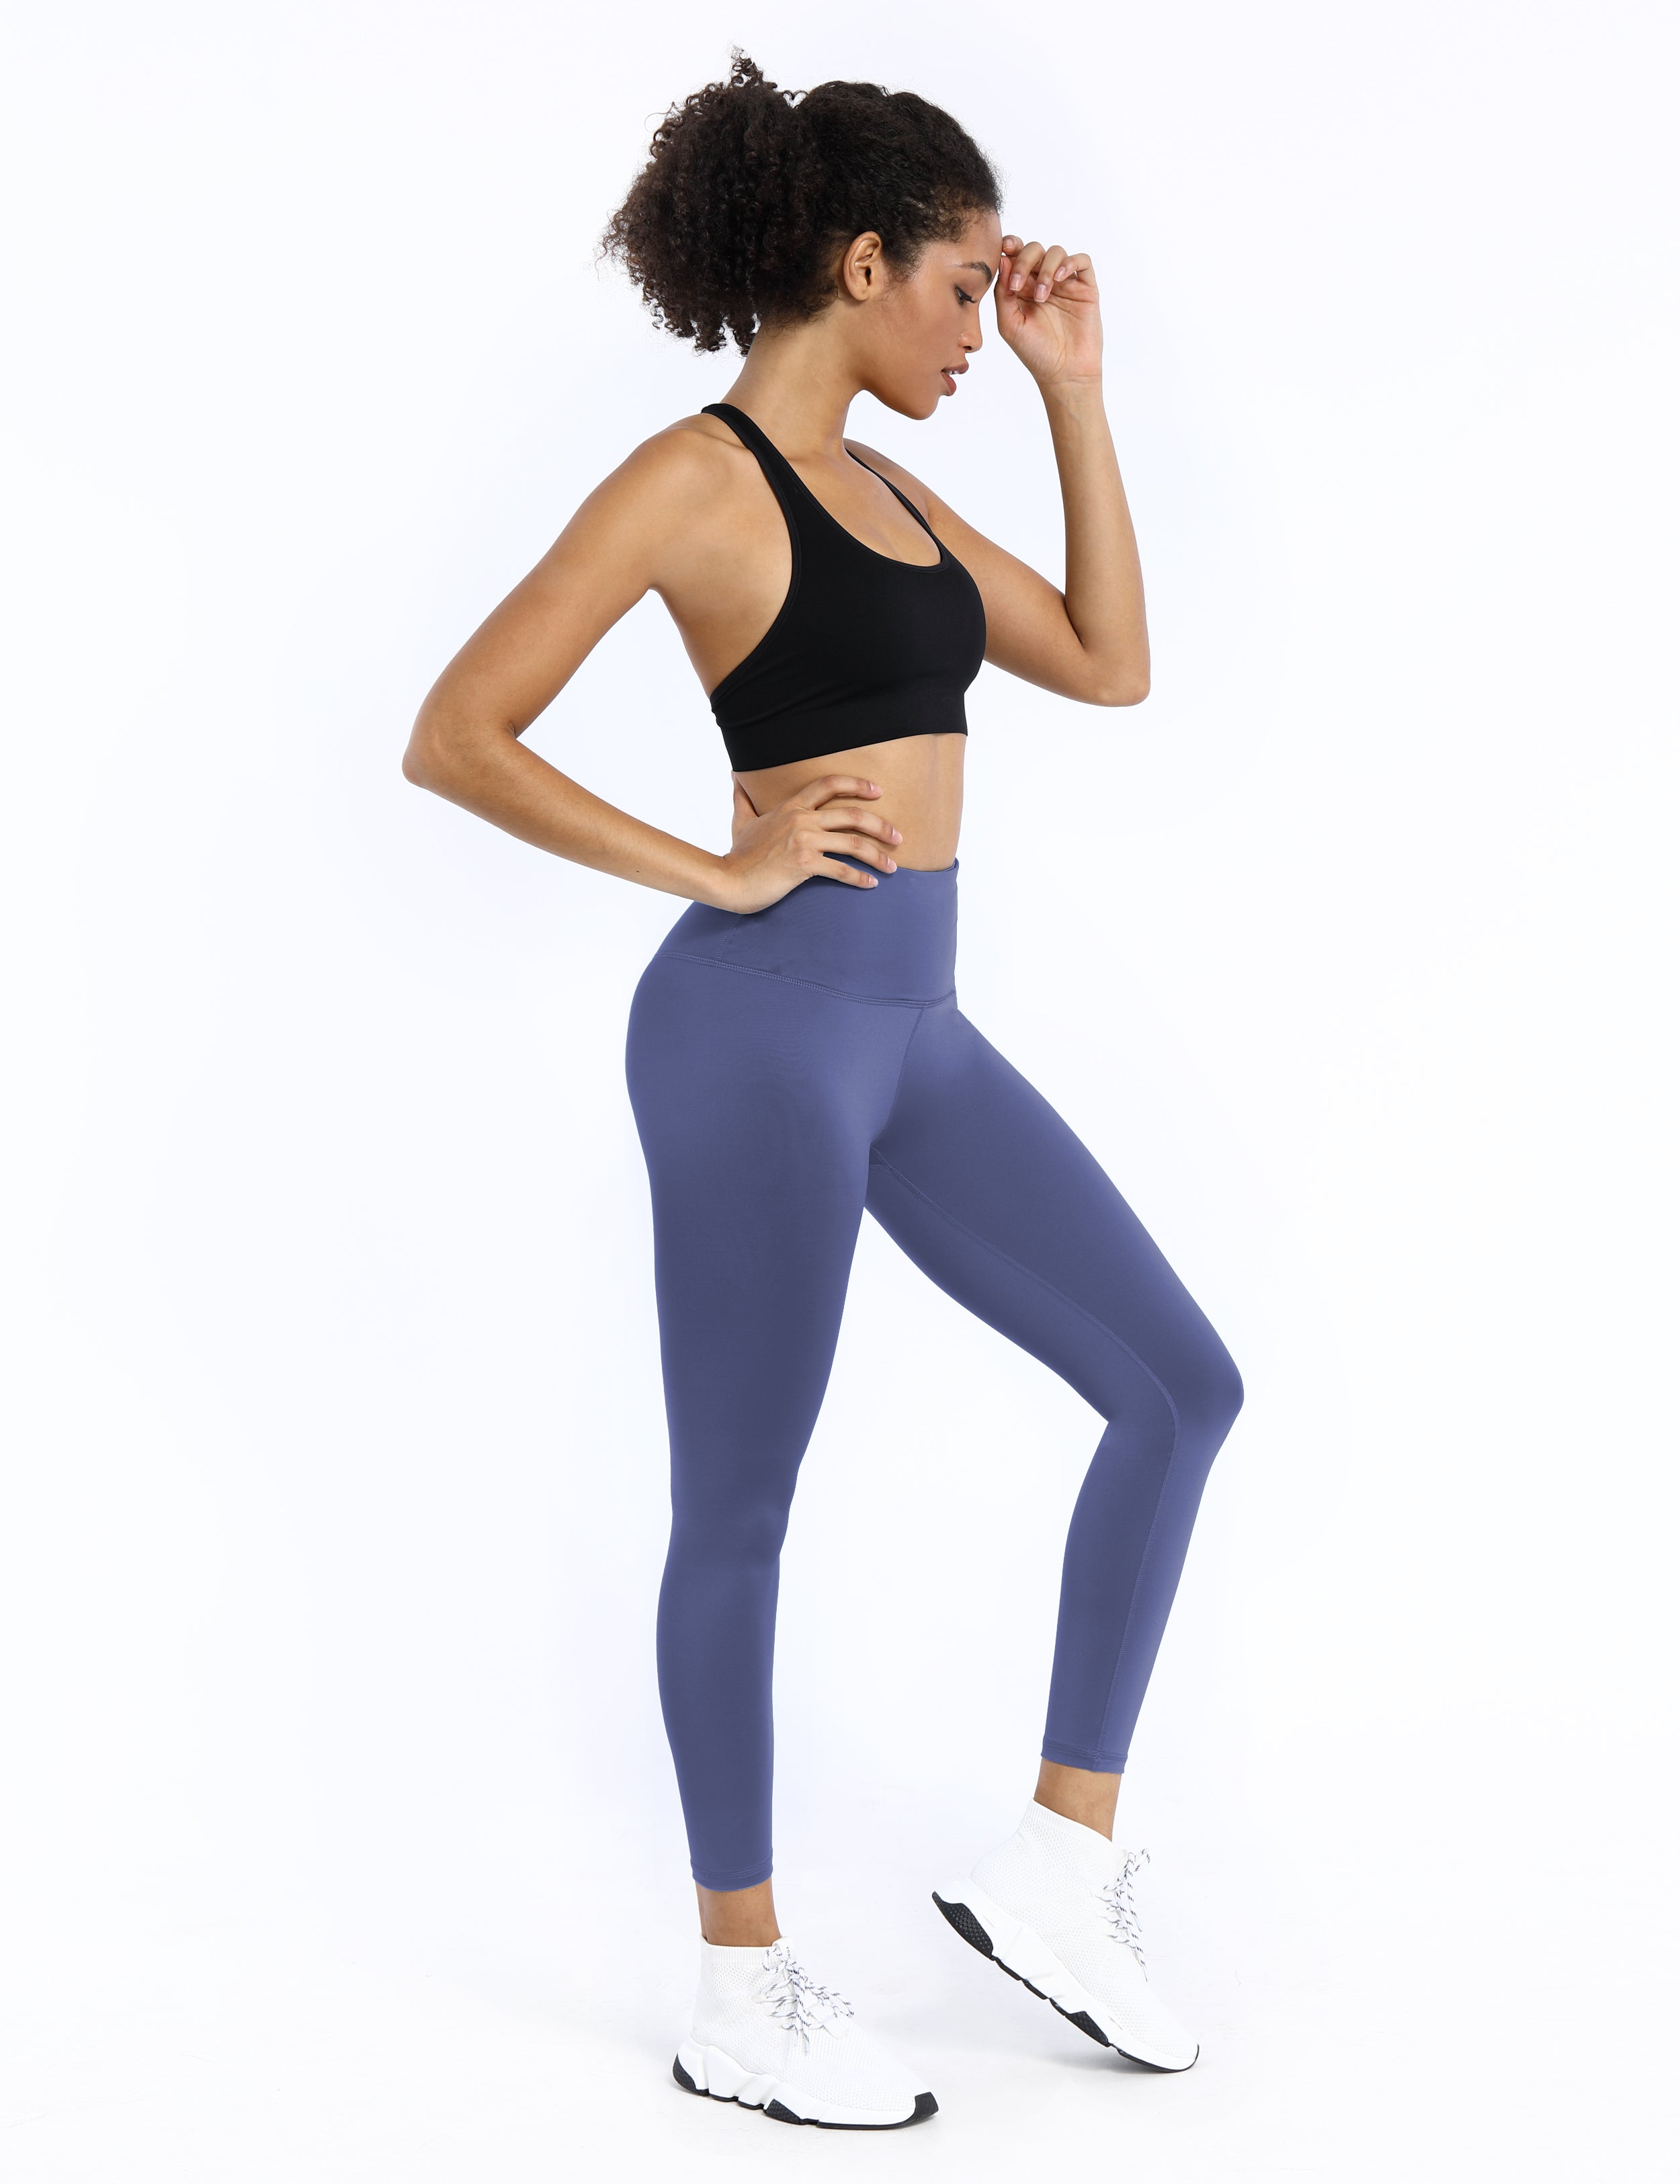 BUBBLELIME 4 Styles 25/26/27/28 High Waist Yoga Pants - Crotch Seamless  Compression_DARKNAVY XX-Small-26 Inseam at  Women's Clothing store